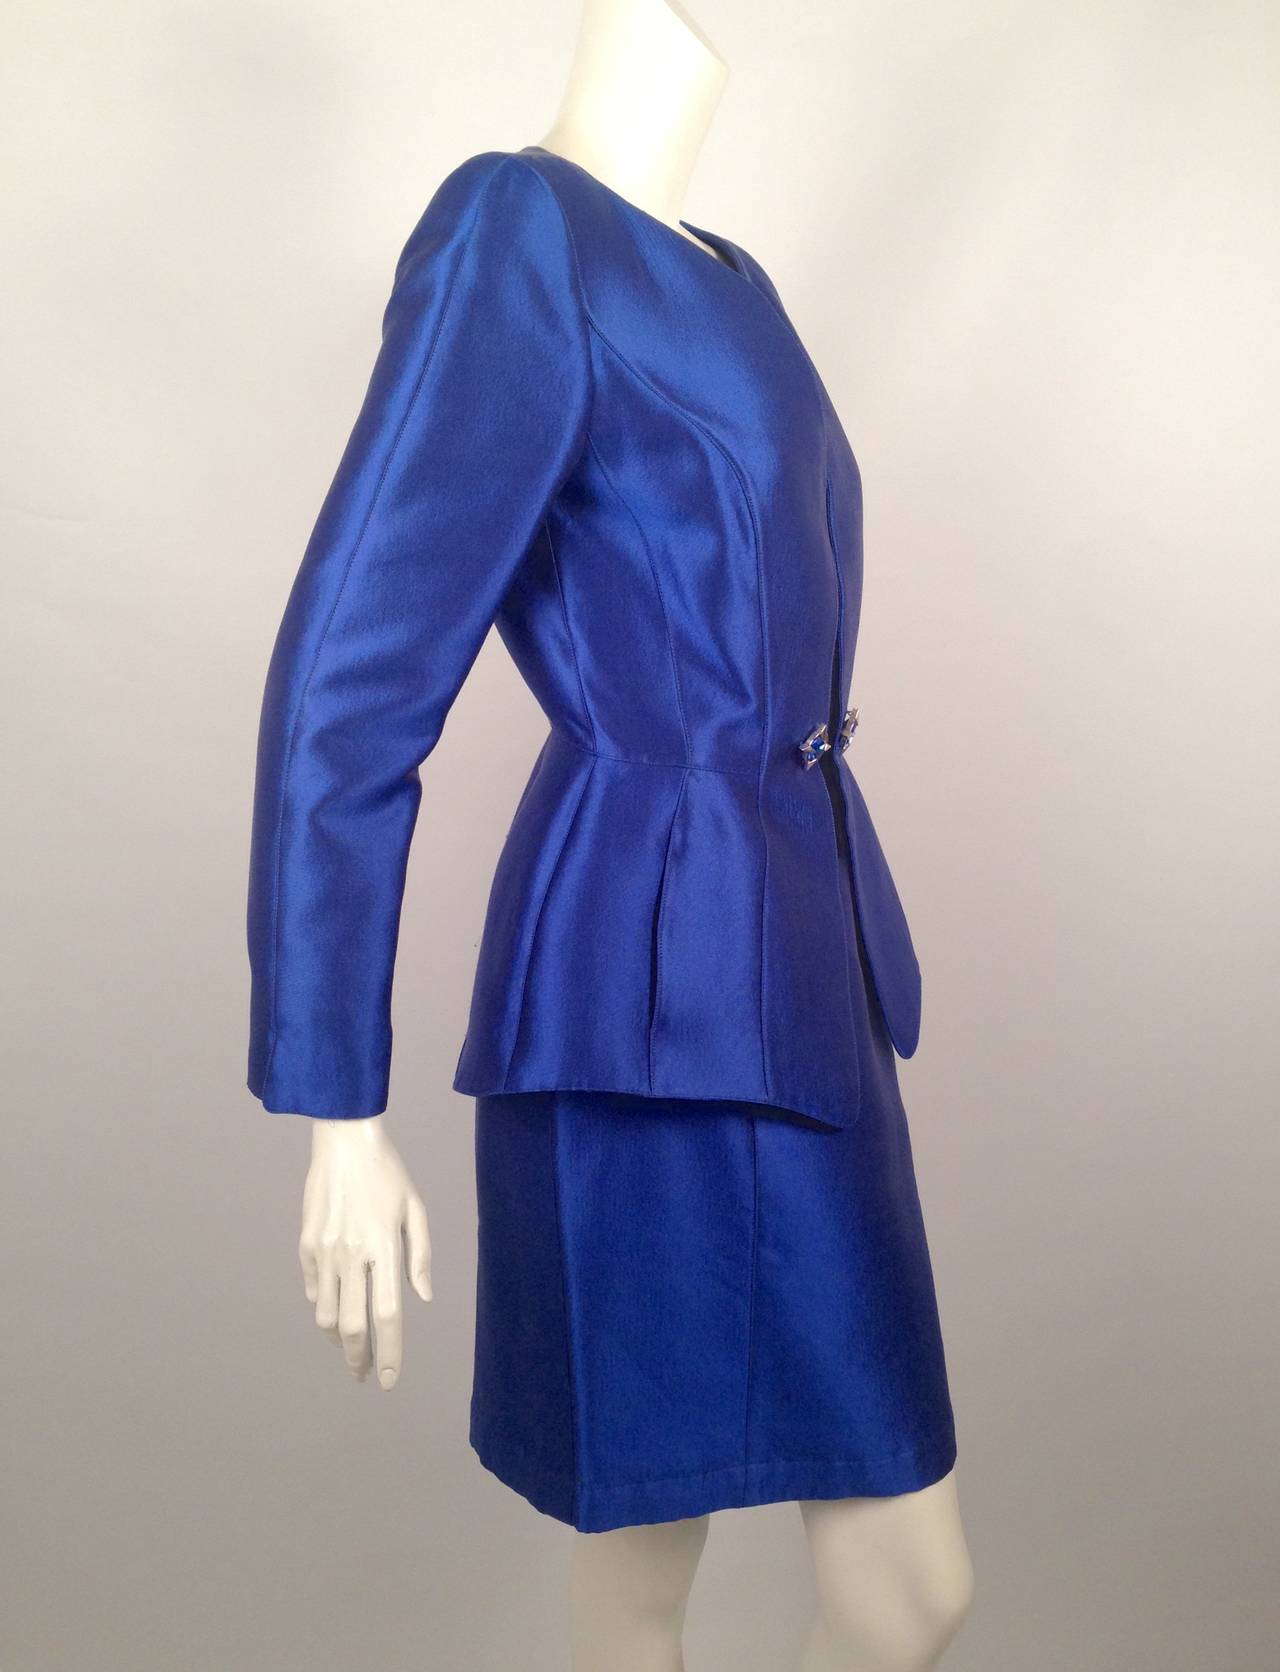 Relieve the Late 80's and Early 90's in this vintage Thierry Mugler skirt suit.  Suit features signature Mugler hour-glass silhouette and a most luxurious wool and silk blend.  Decidedly feminine jacket has two cleverly hidden pockets, velvet panel